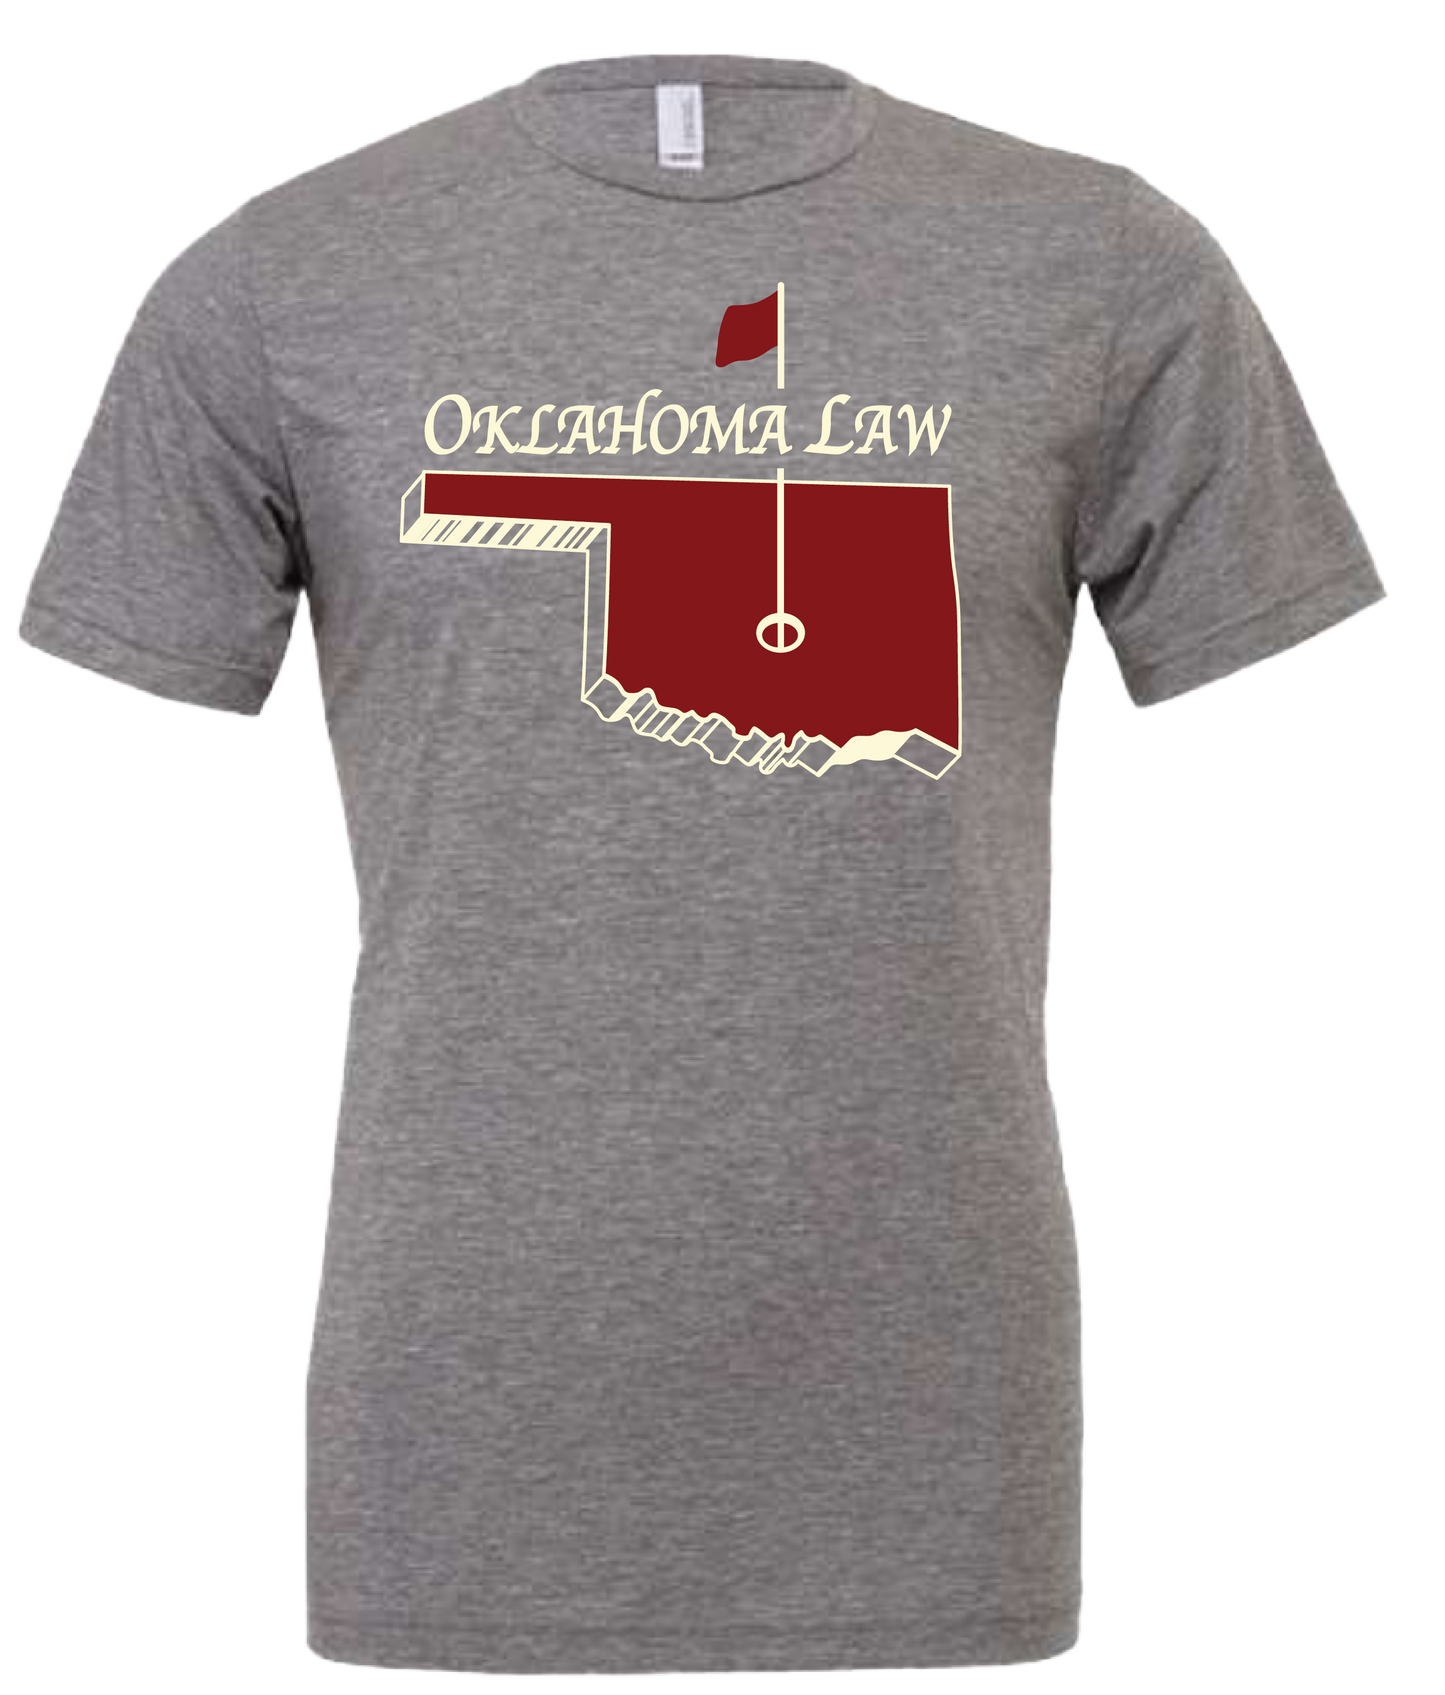 front: Oklahoma Law OK Golf/ back: OU FedSoc An Organization Unlike Any Other t-shirt